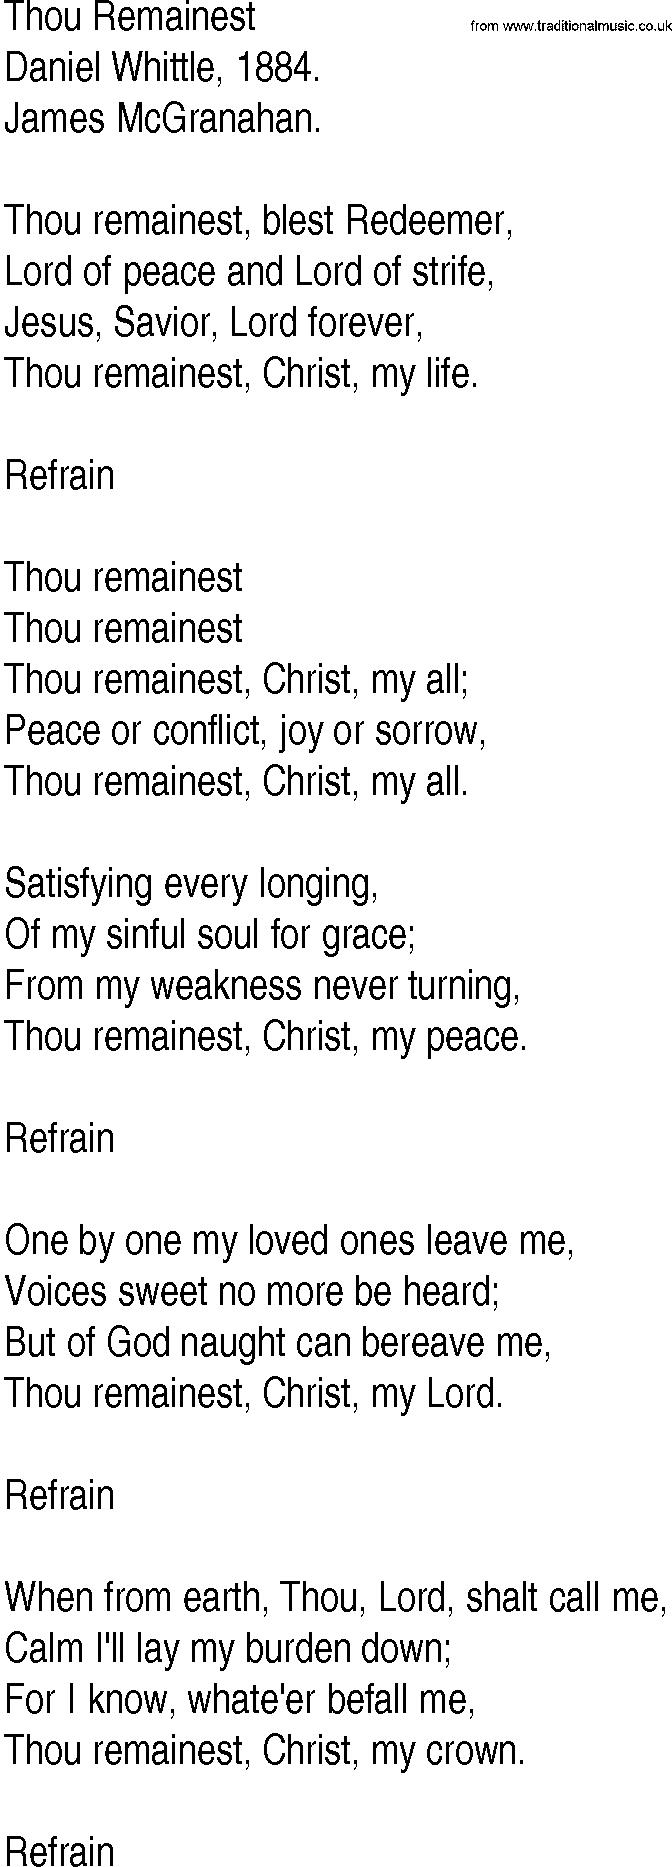 Hymn and Gospel Song: Thou Remainest by Daniel Whittle lyrics